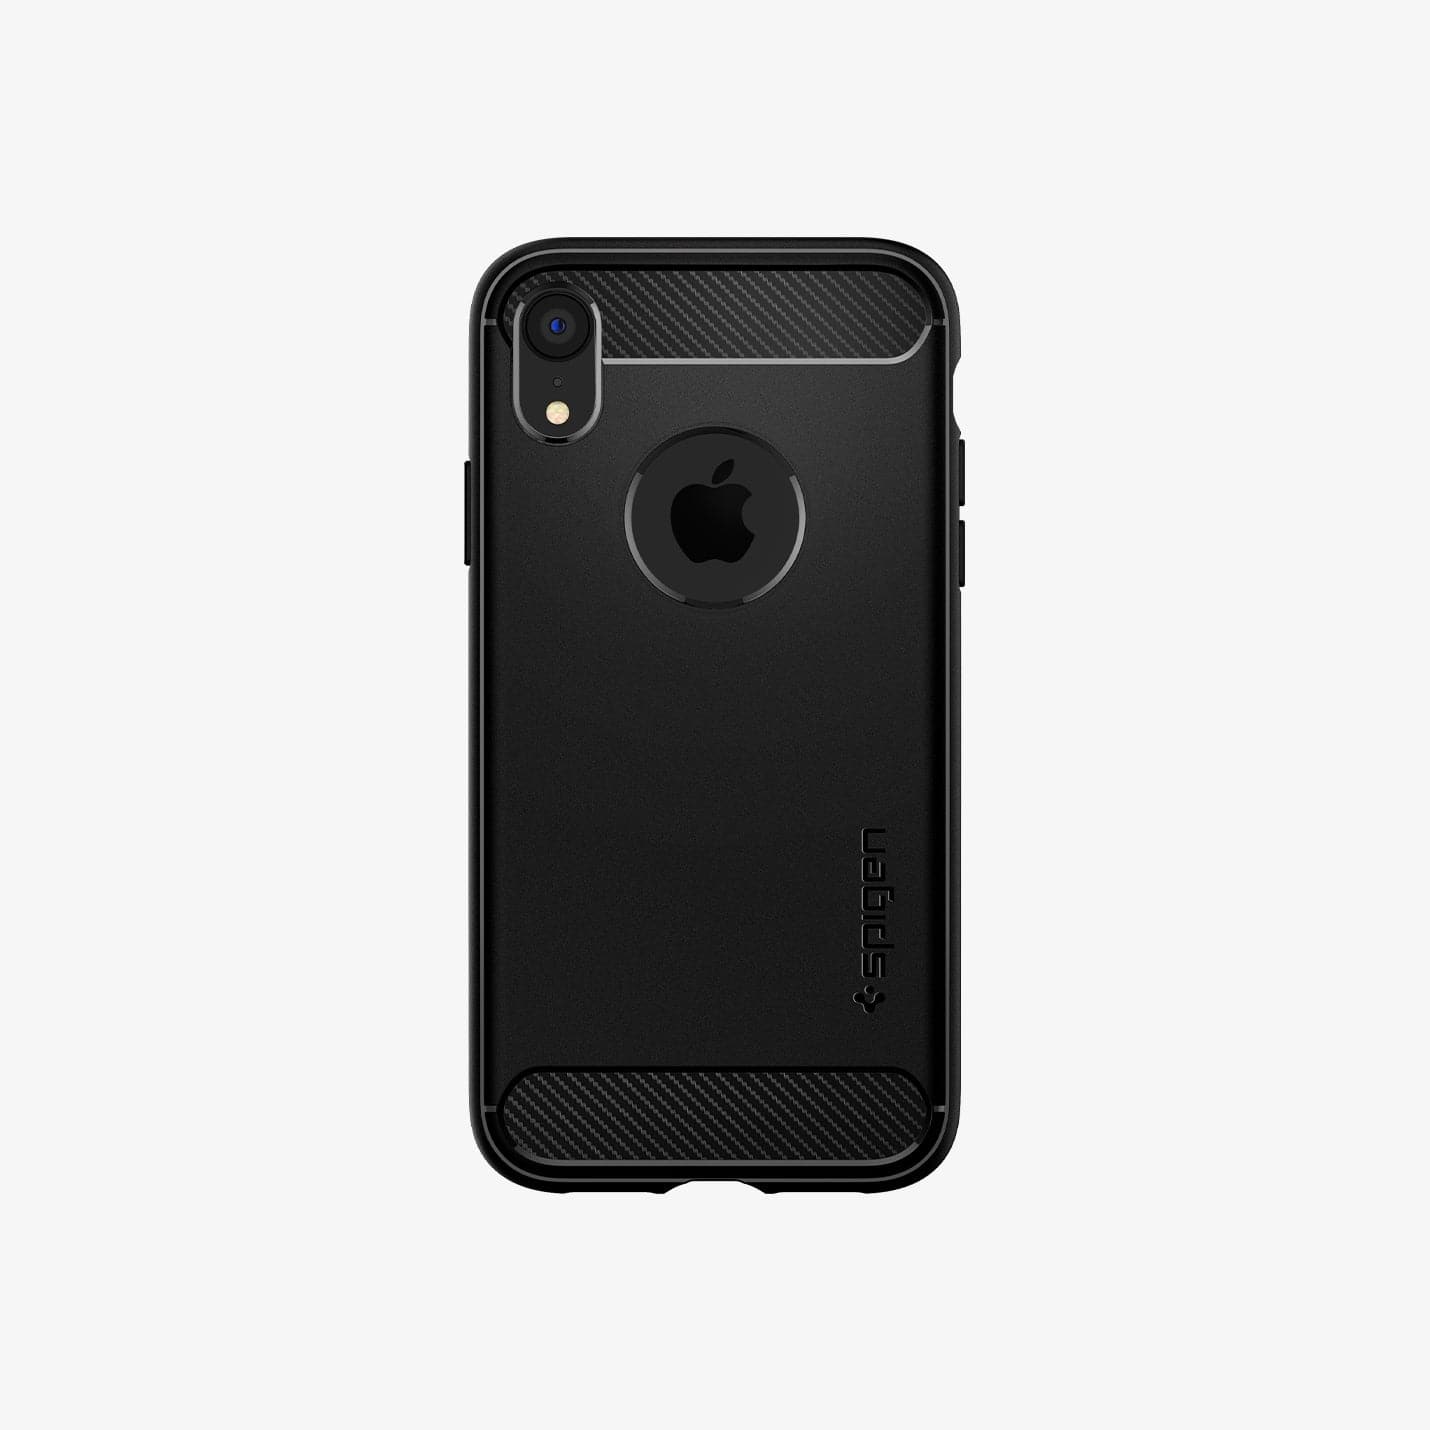 064CS24871 - iPhone XR Case Rugged Armor in matte black showing the back